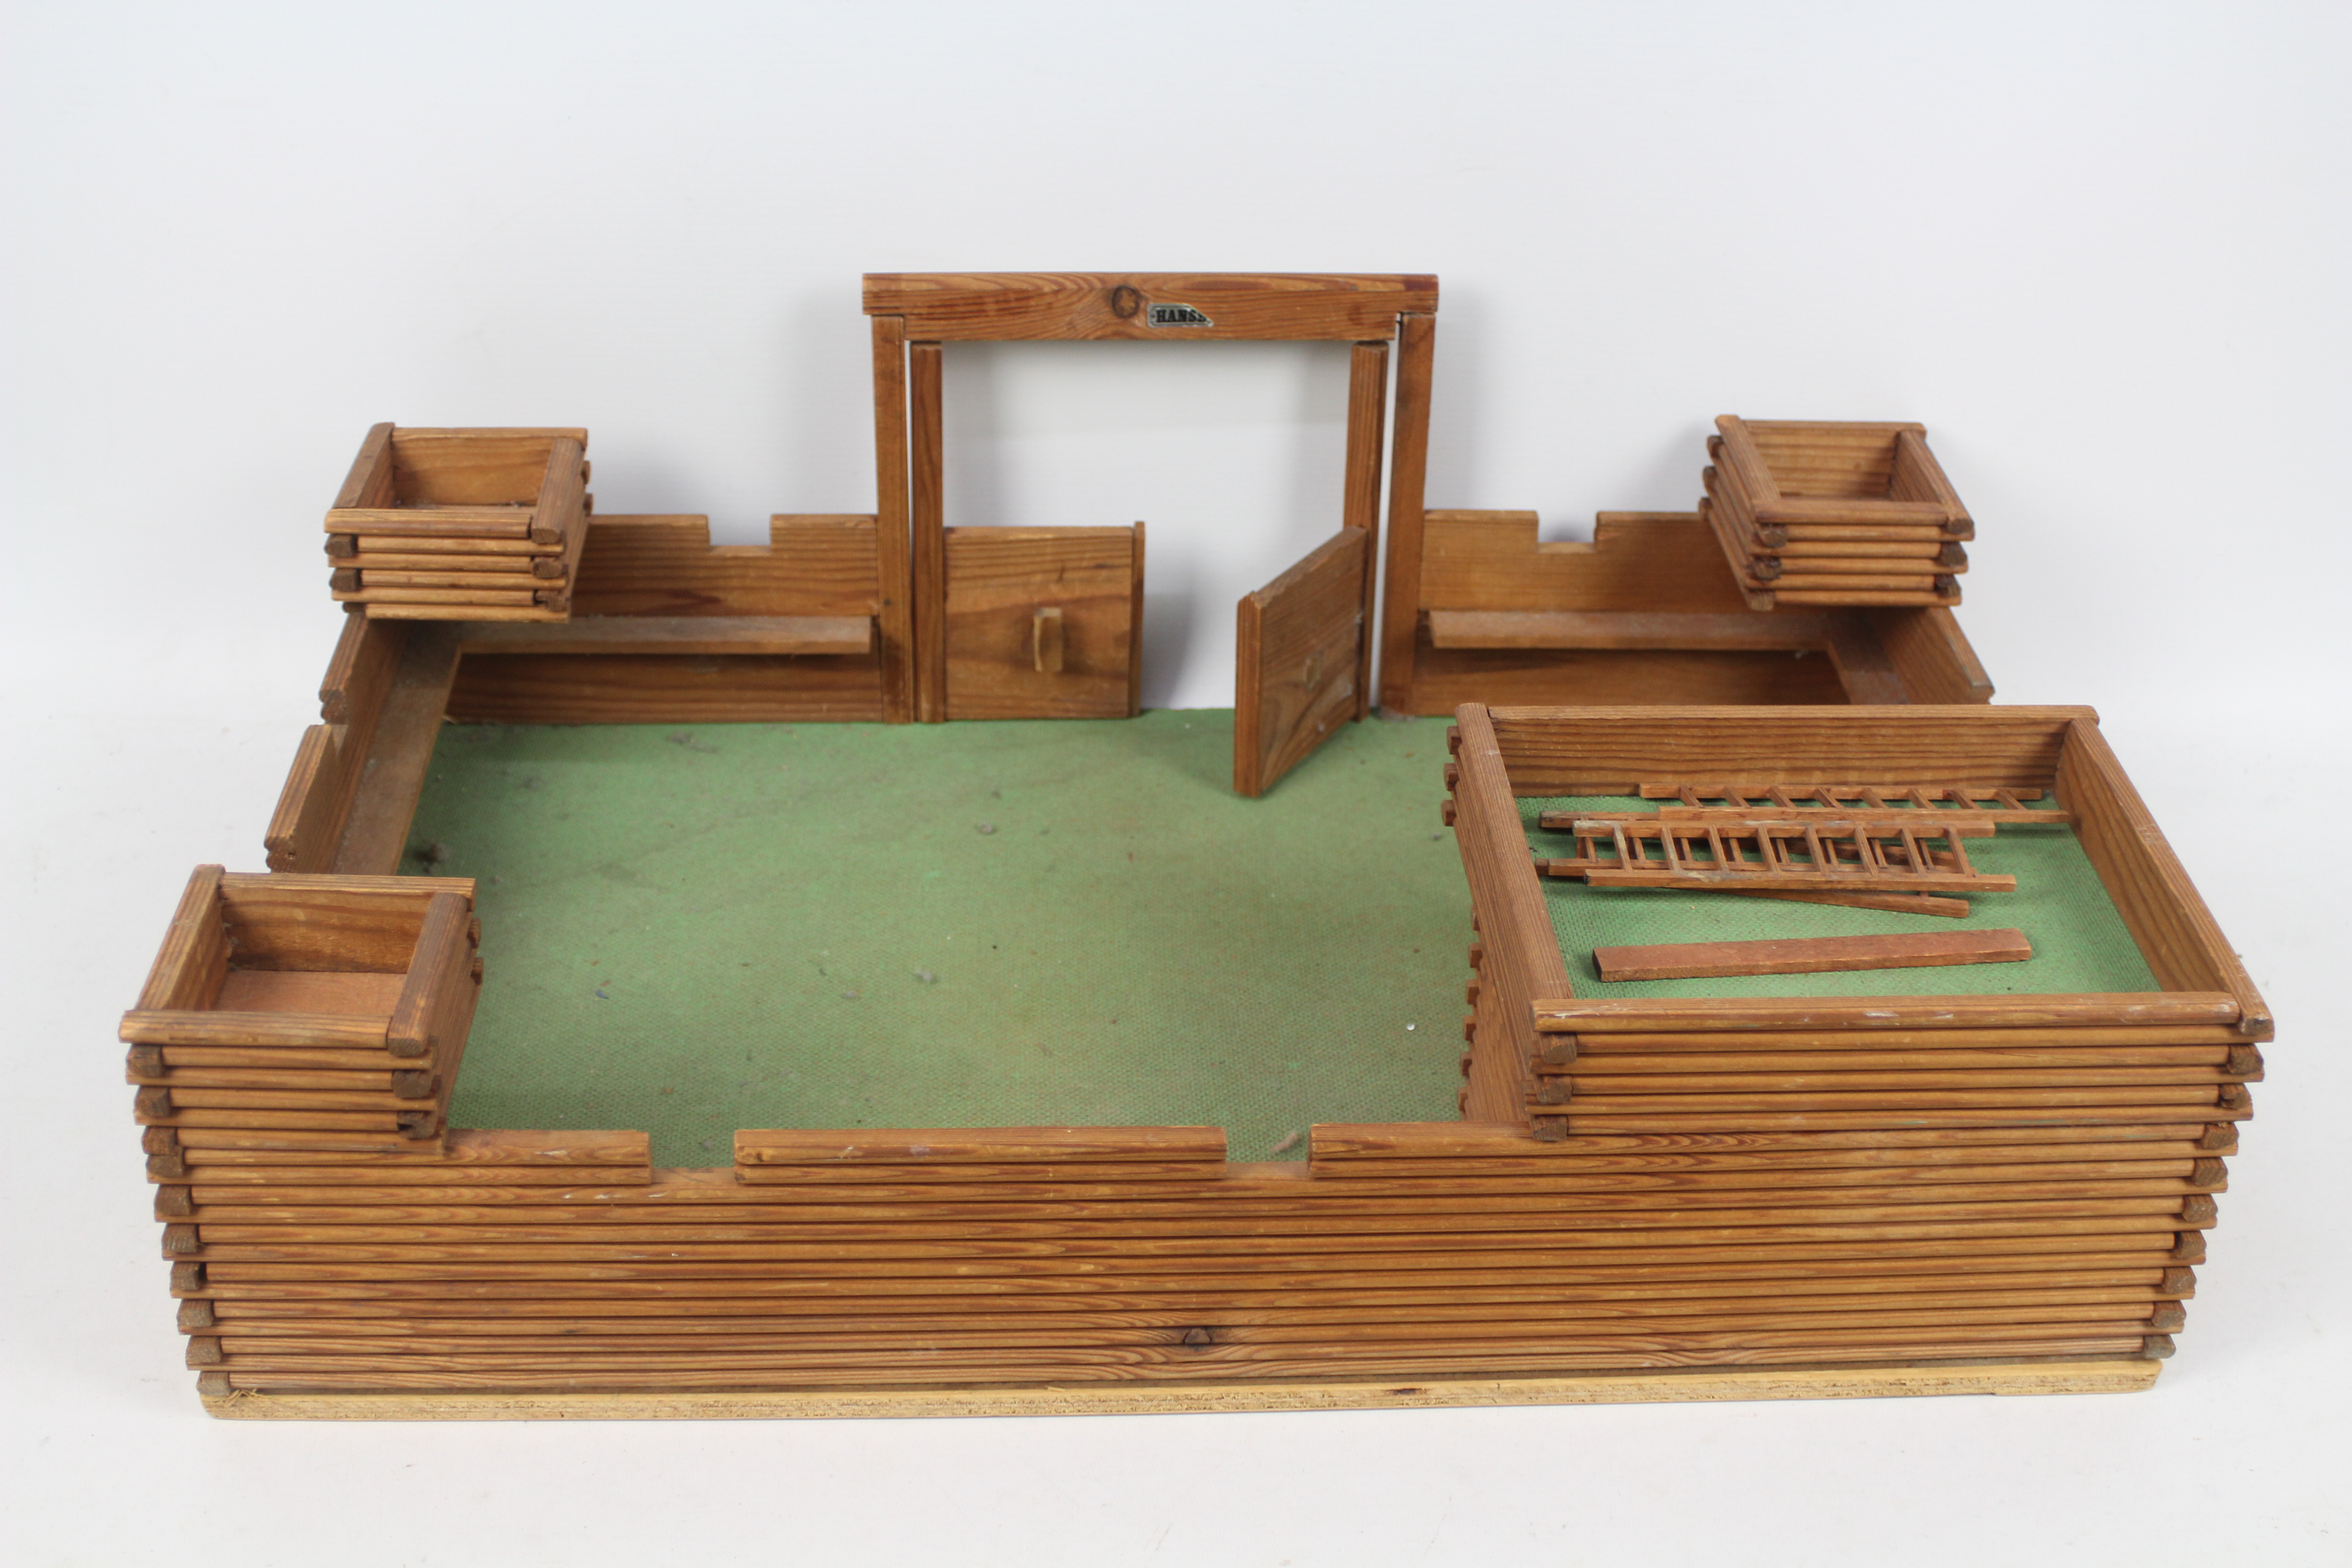 Hanse (Denmark) - A vintage unboxed wooden toy fort ' Fort Laredo' by the Danish manufacturer Hanse. - Image 6 of 8